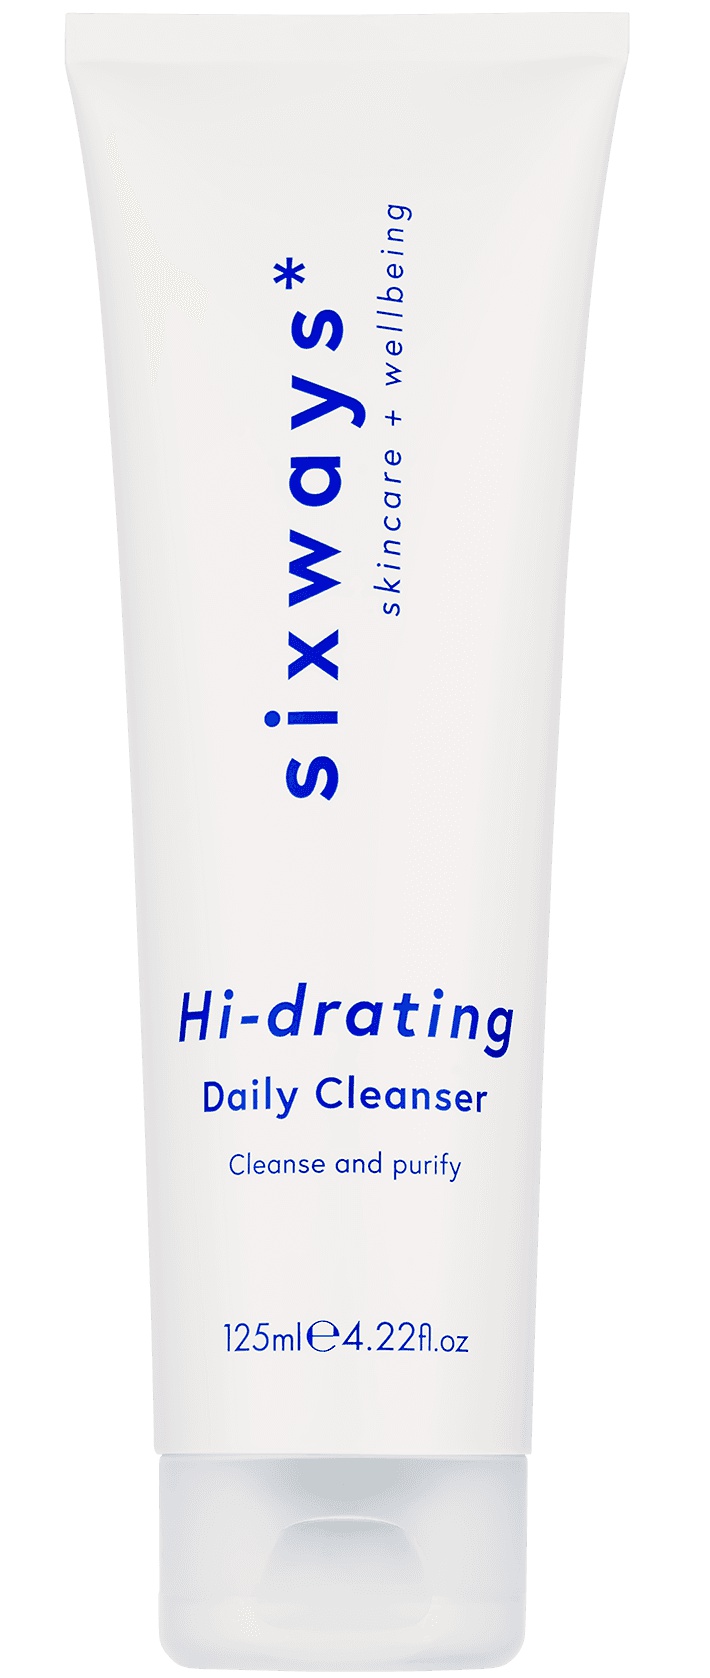 Sixways Hi-drating Daily Cleanser